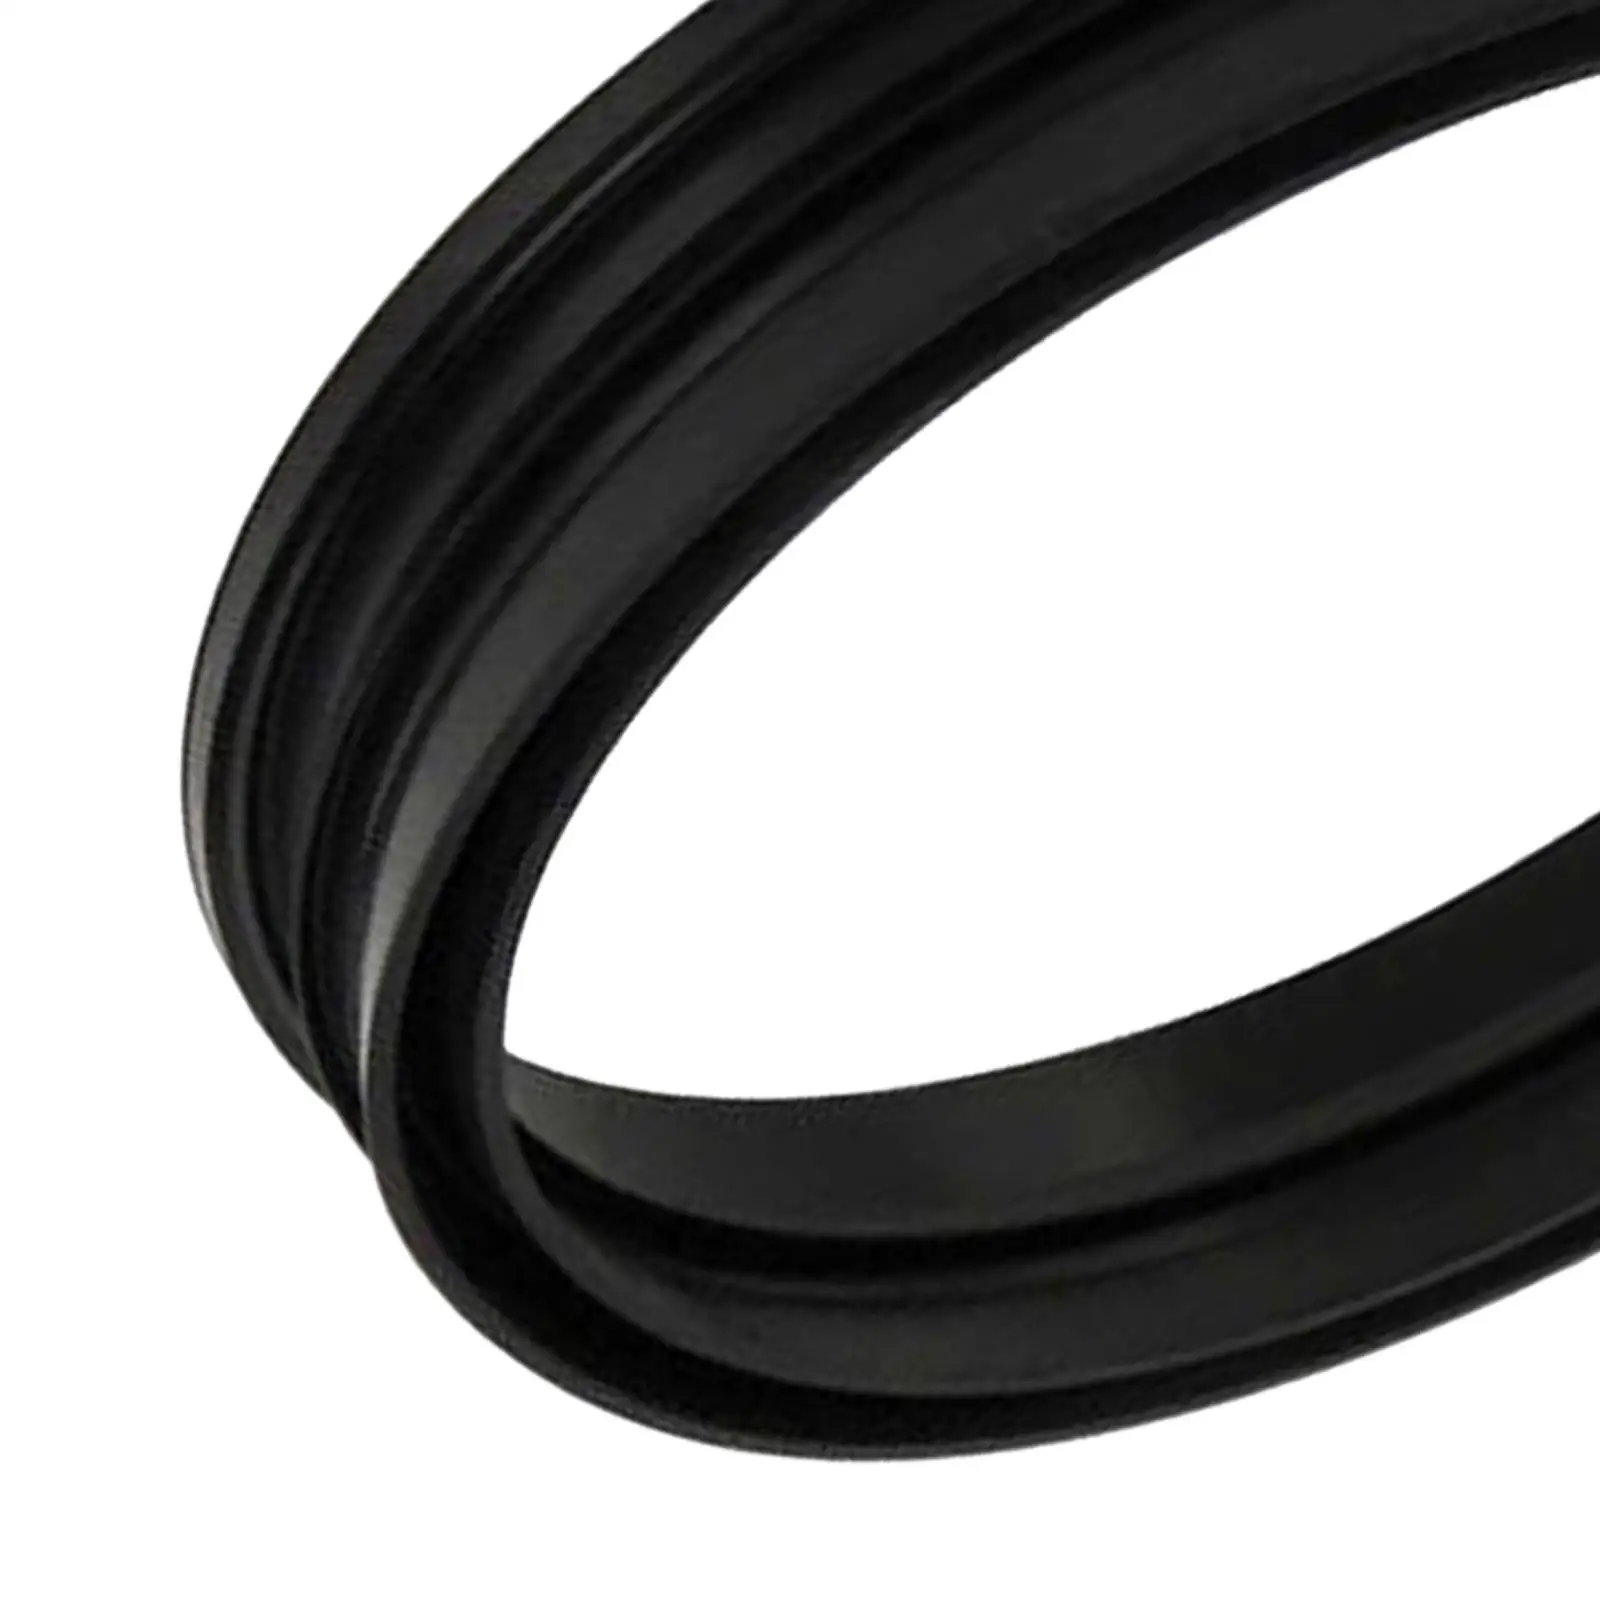 Fuel Tank Pump Seal O Ring 17342-79900 Replaces, Easy to Install for R32 Automotive Repair Parts Black Vehicle Accessory